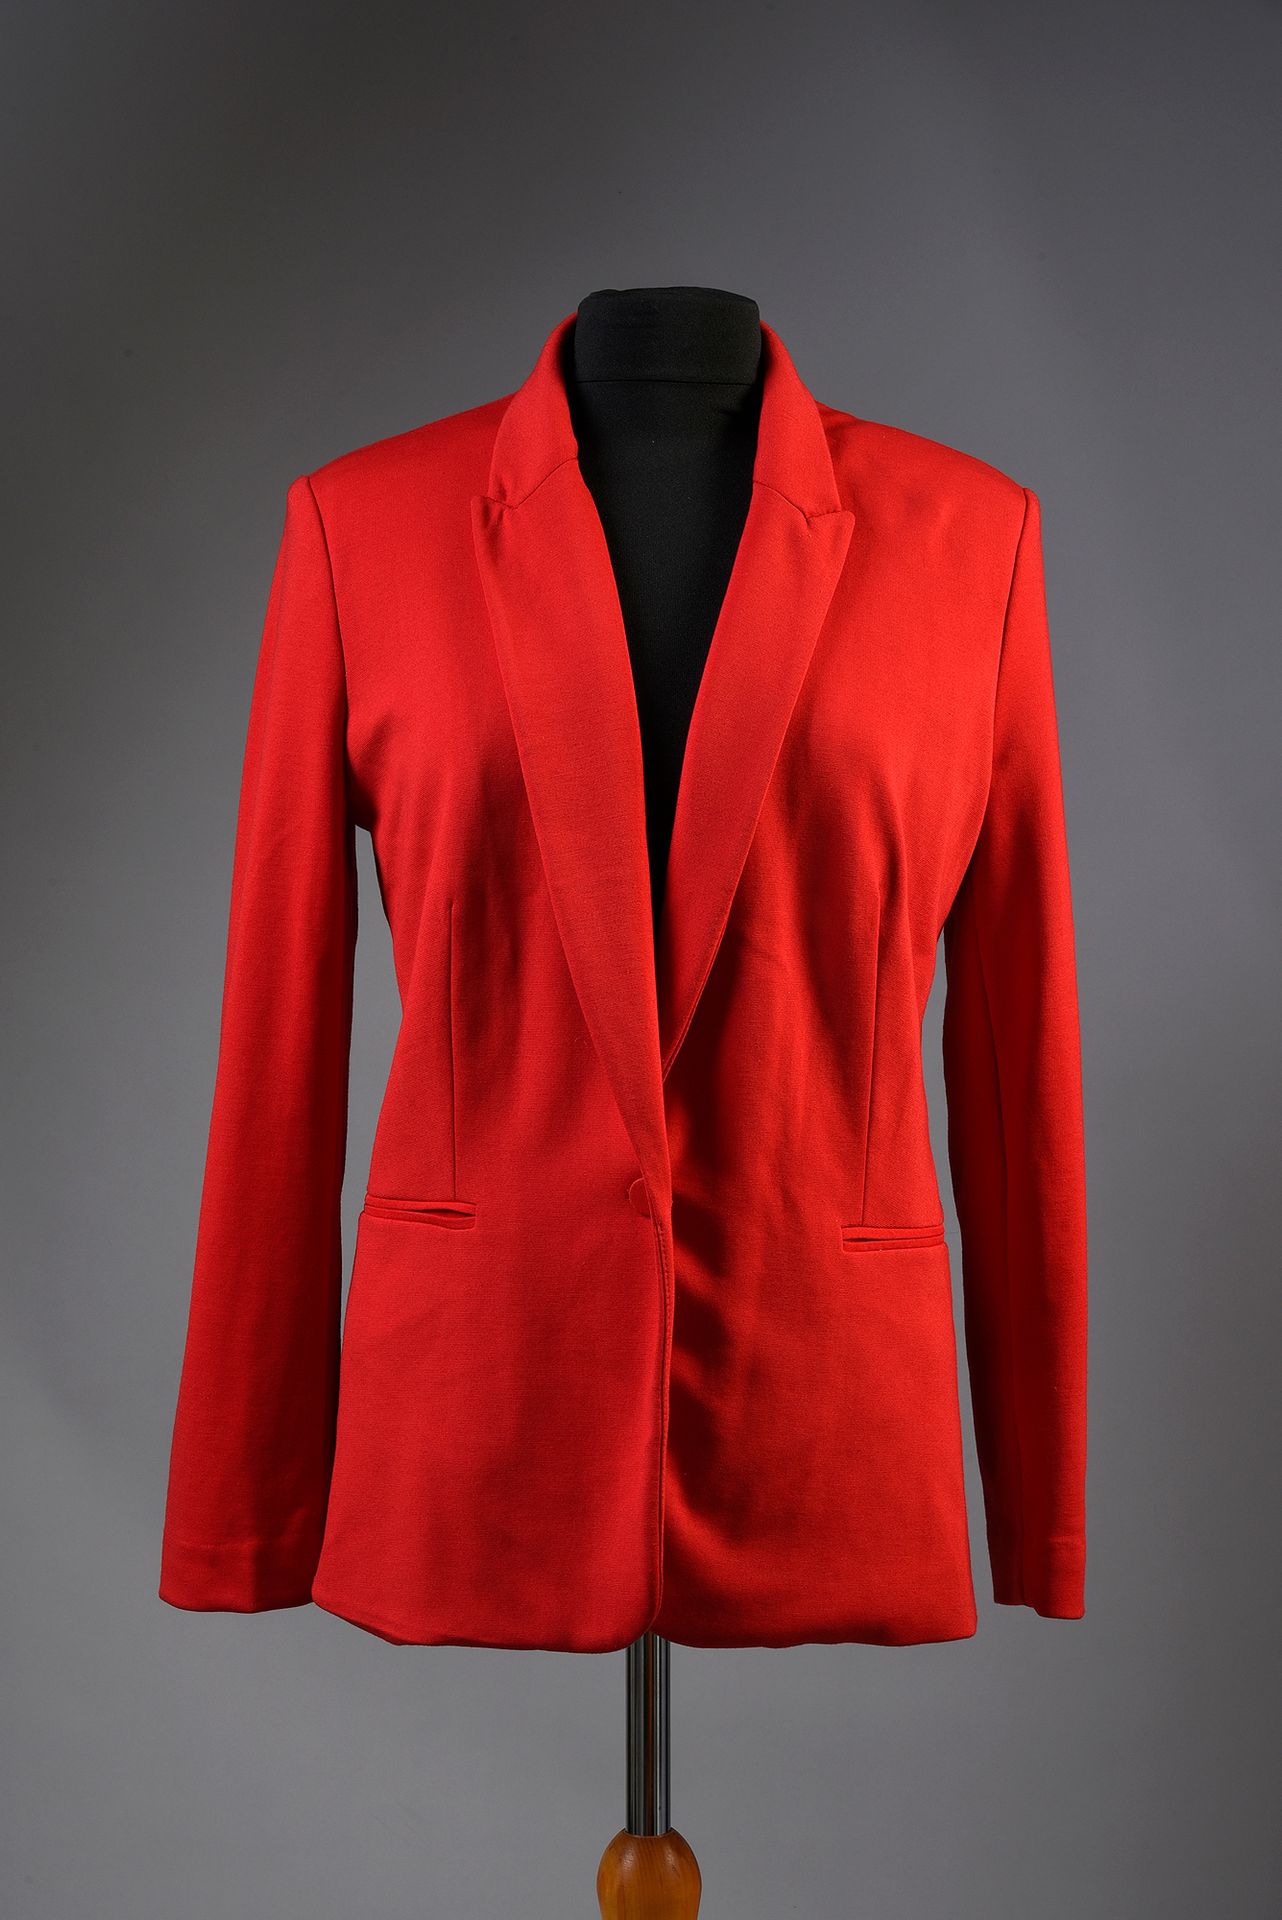 Null LINDA DE SUZA : 1 red stage jacket from Mango, in tergal. Worn on televisio&hellip;